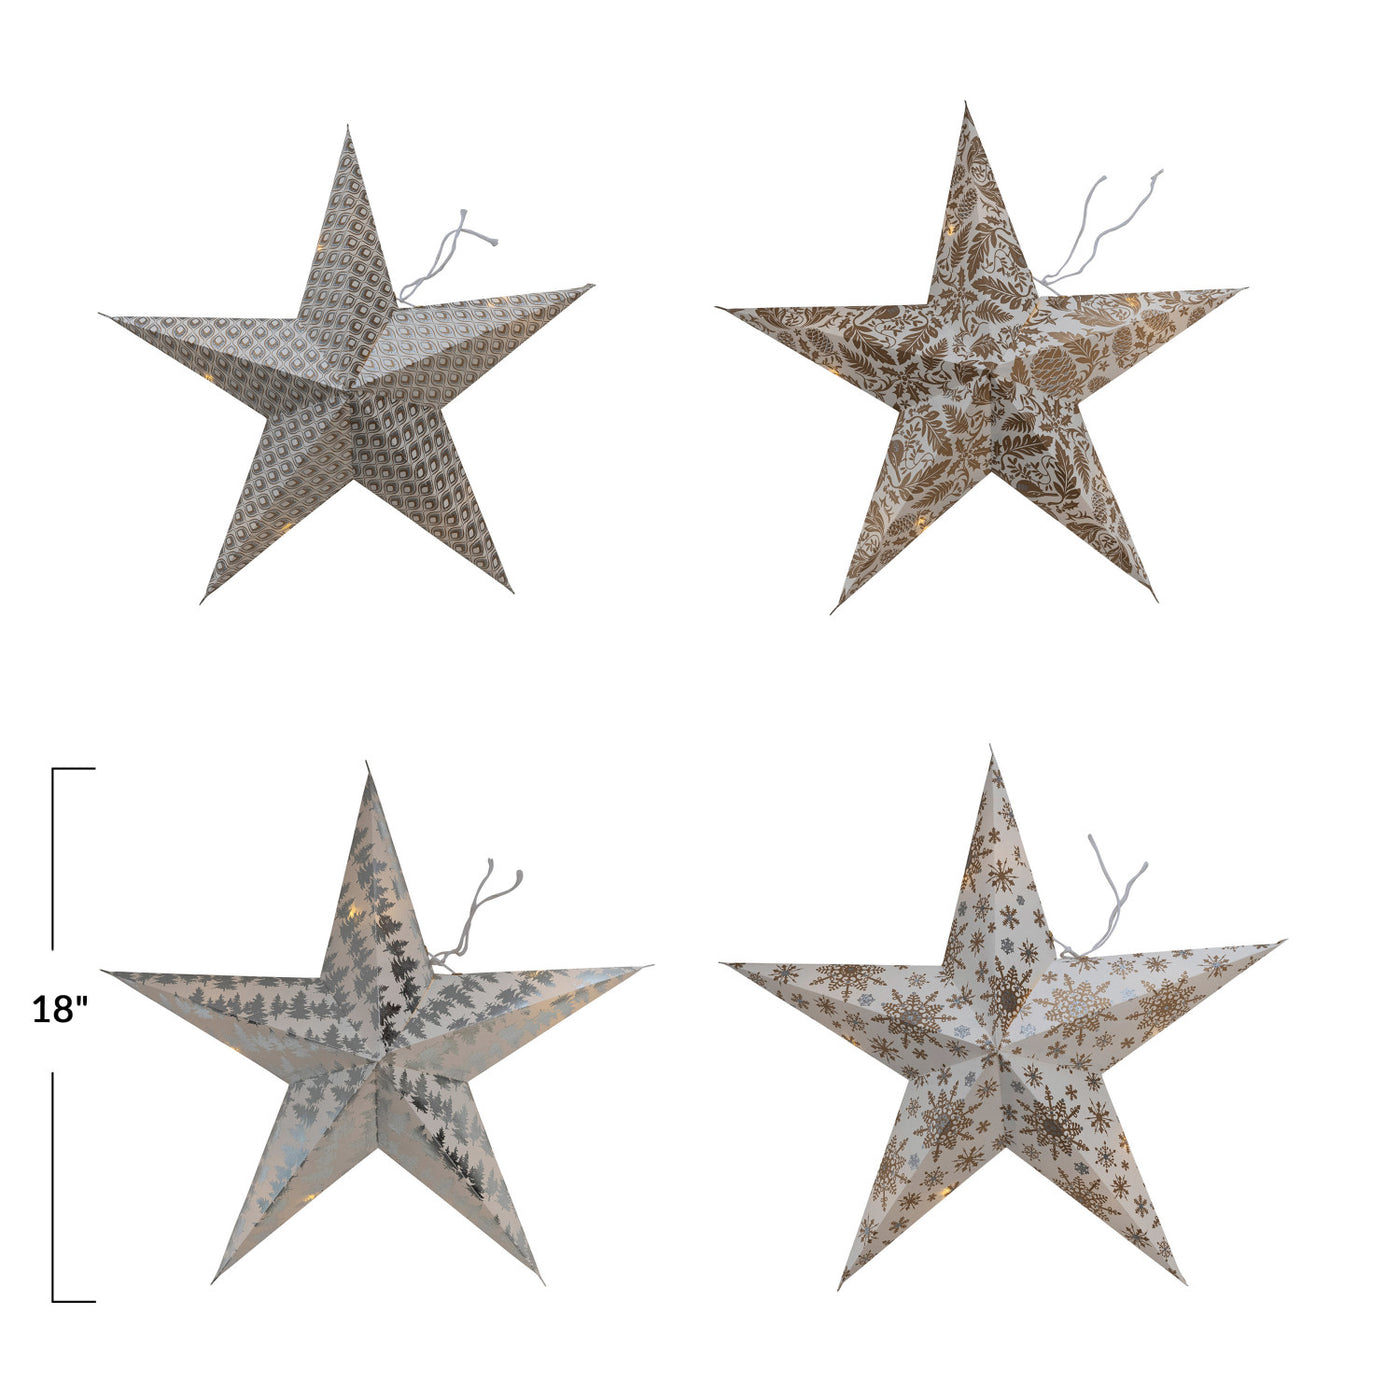 18"H Folding 5-Point Recycled Paper Star Ornament w/ LED Light String